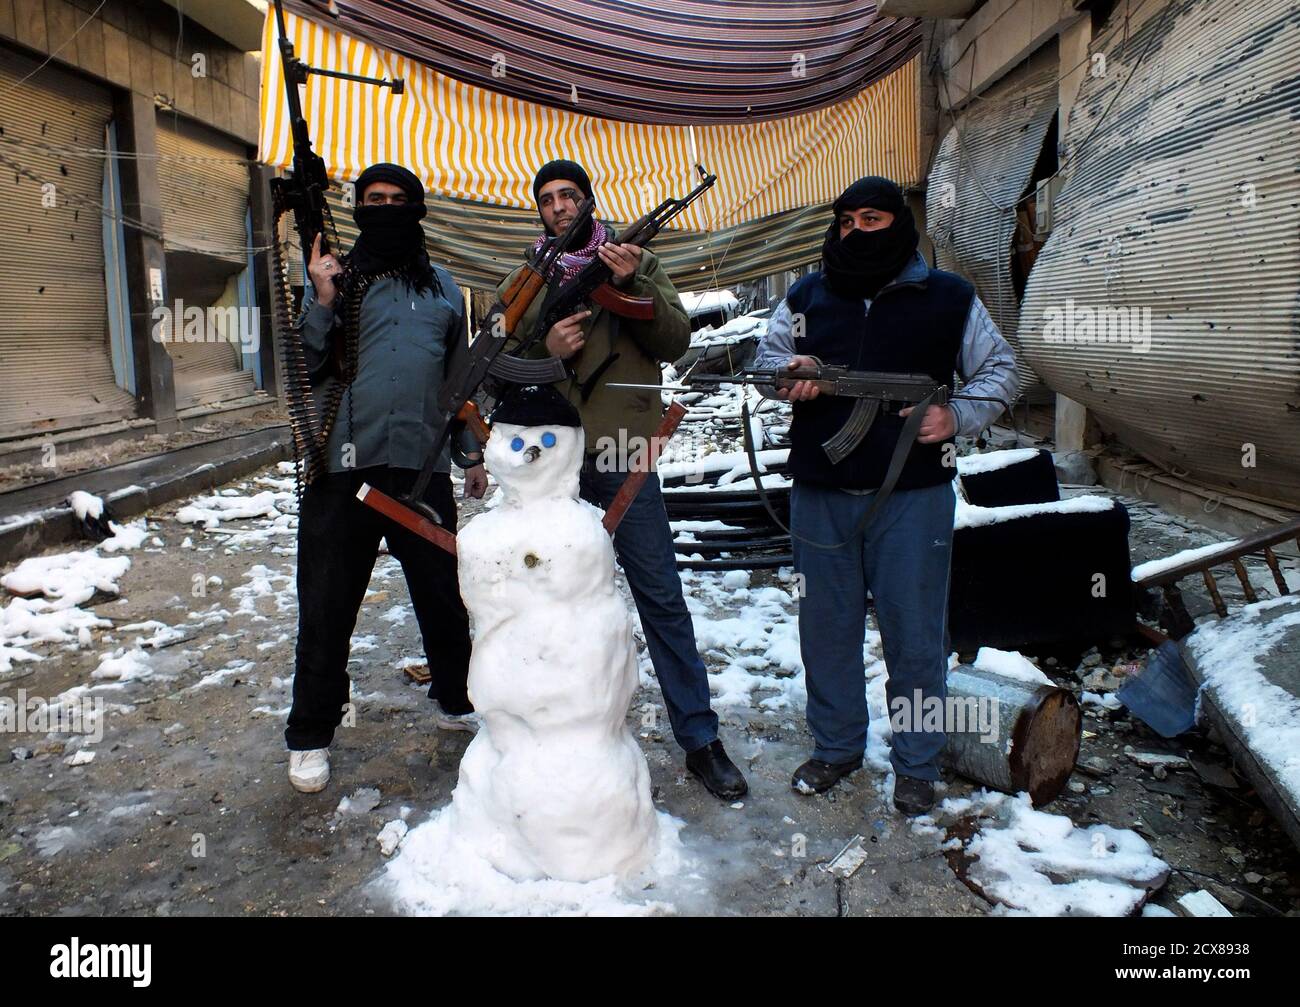 Members of the Free Syrian Army pose with their weapons and a snowman at the Jouret al Shayah area in Homs January 10, 2013. Picture taken January 10, 2013.                            REUTERS/Yazan Homsy (SYRIAS - Tags: CONFLICT MILITARY TPX IMAGES OF THE DAY) Stock Photo